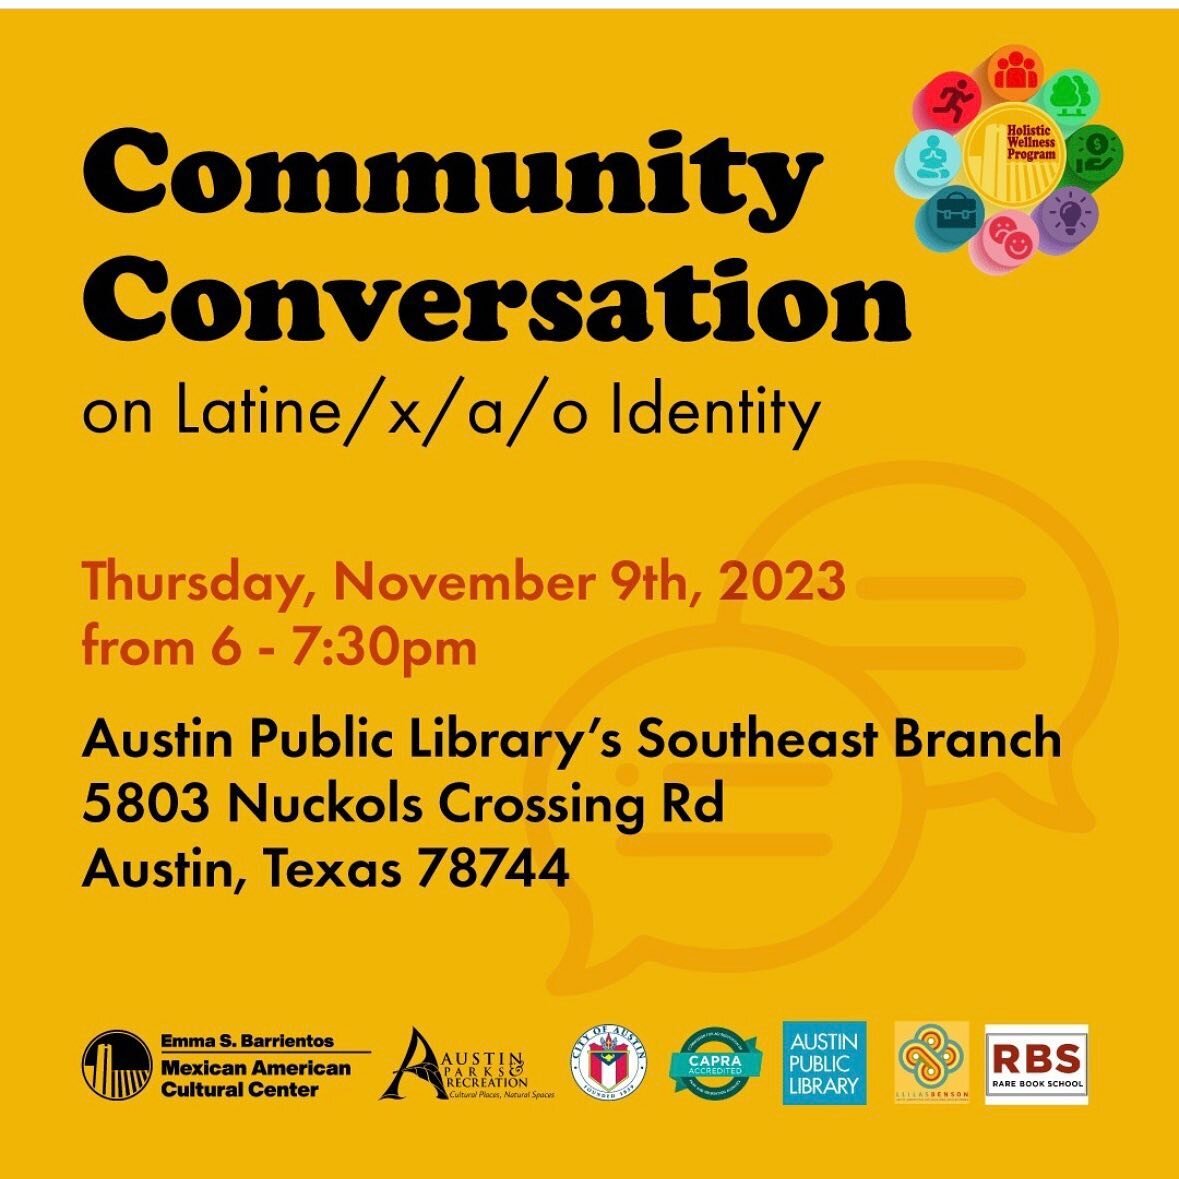 Where are my ATX LatinX People at?!

Community Conversation on Latine/x/a/o Identity

Thursday, November 9th, 2023 from 6-7:30pm
Austin Public Library, Southeast Branch

Join this discussion on identity within the Latino/a, LatinX, Latine, Hispanic, 